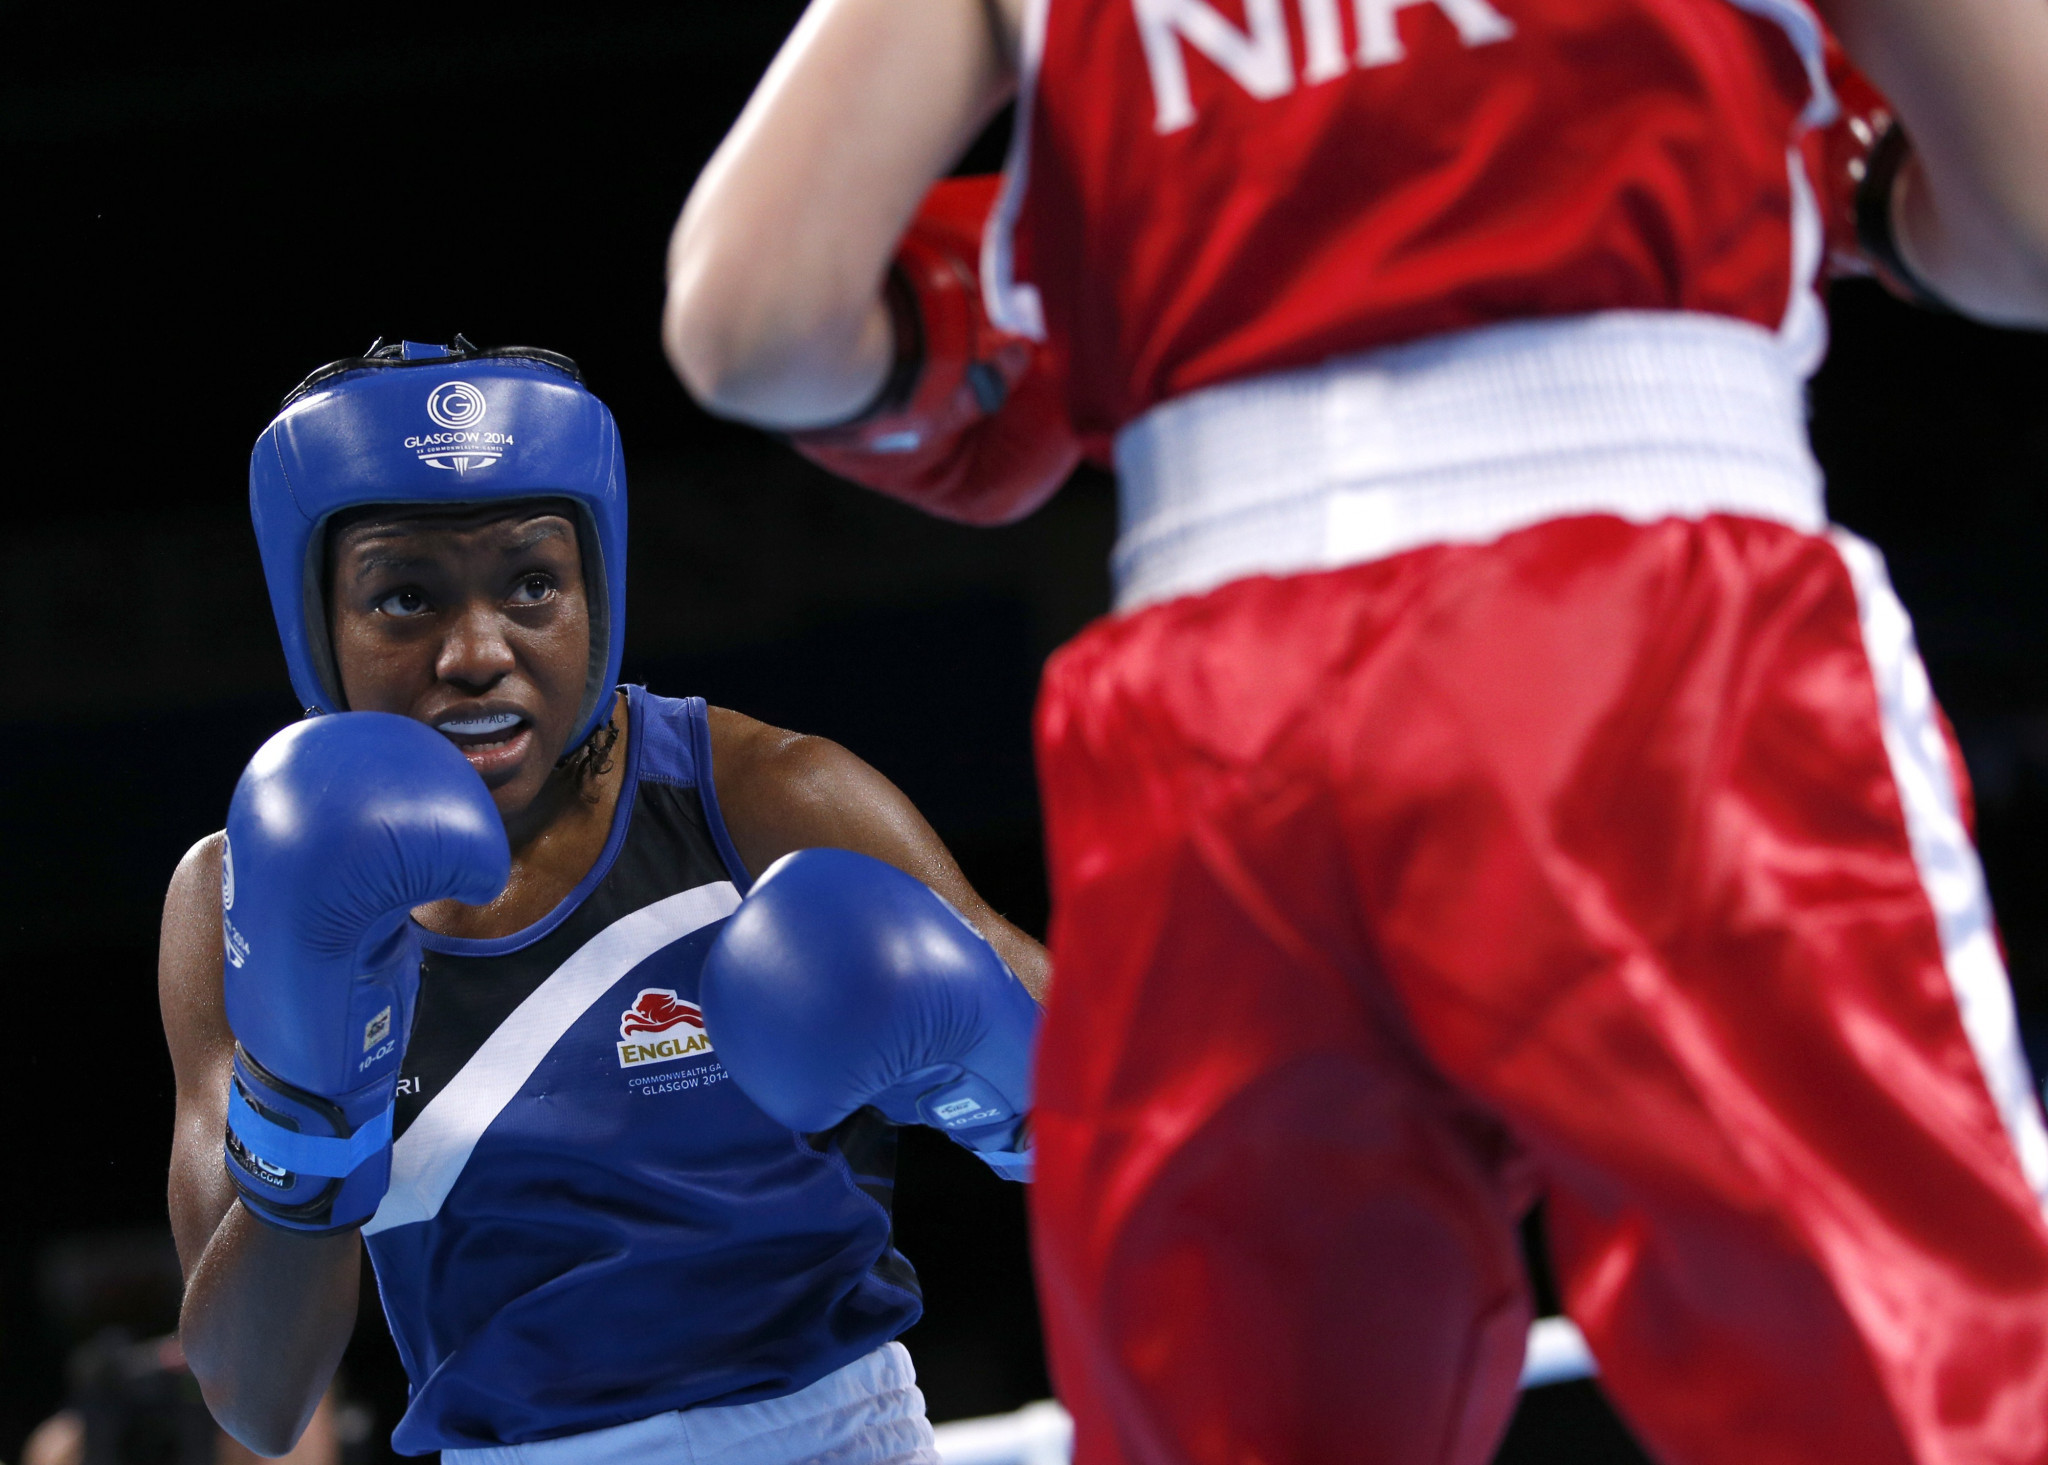 The presence of Nicola Adams at the Commonwealth Games ensured the event was high-profile following her Olympic triumph at London 2012 ©Getty Images